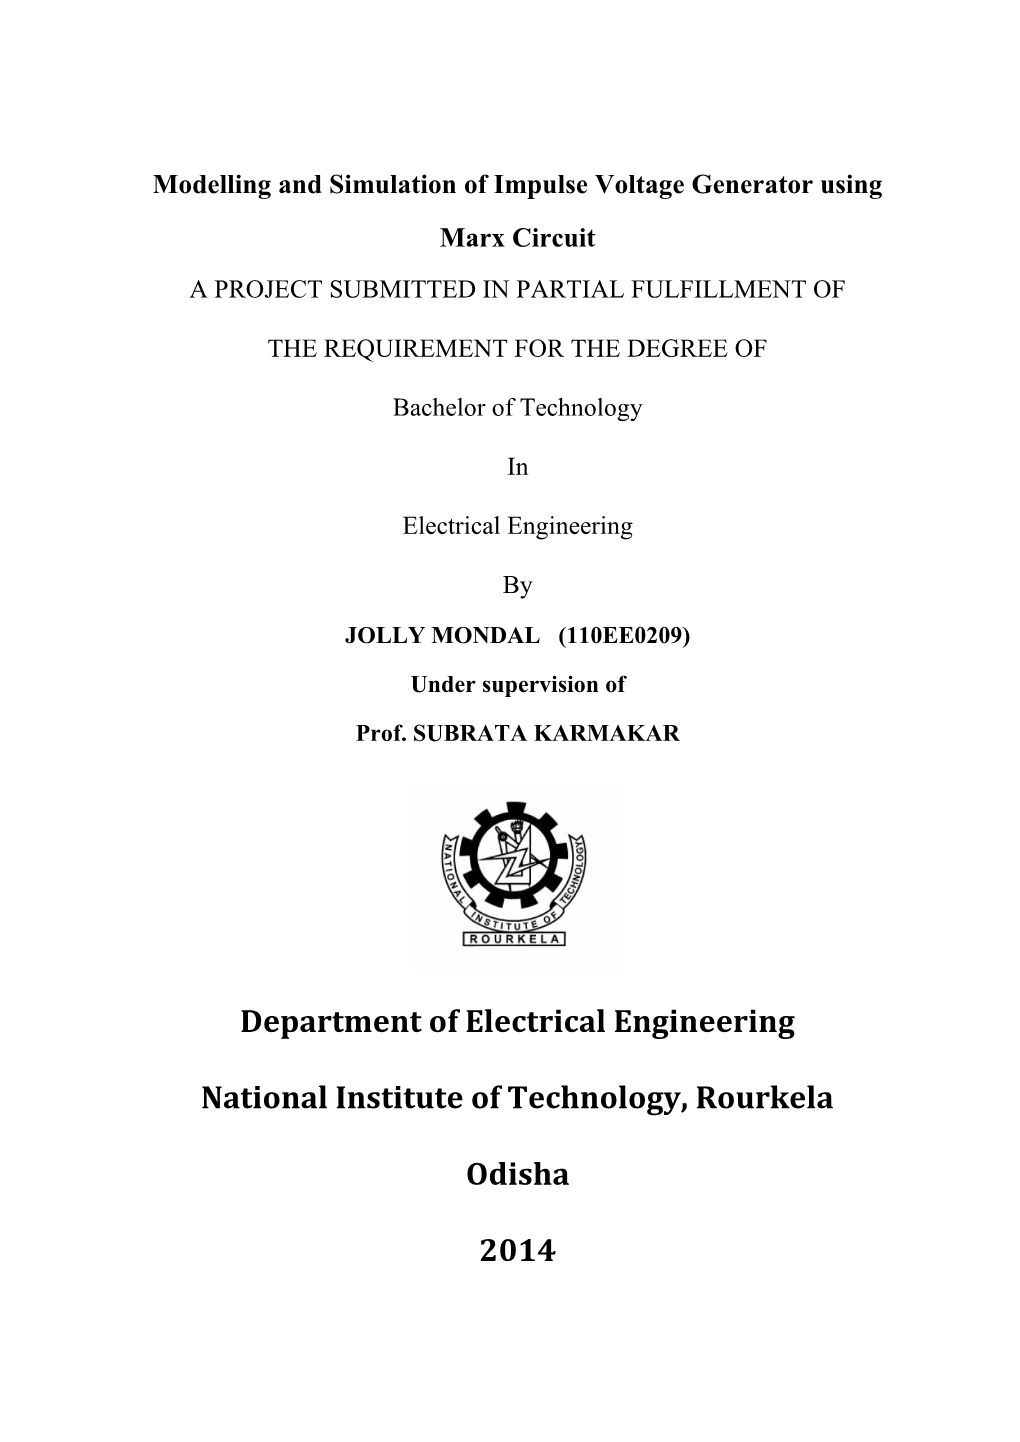 Modelling and Simulation of Impulse Voltage Generator Using Marx Circuit a PROJECT SUBMITTED in PARTIAL FULFILLMENT OF